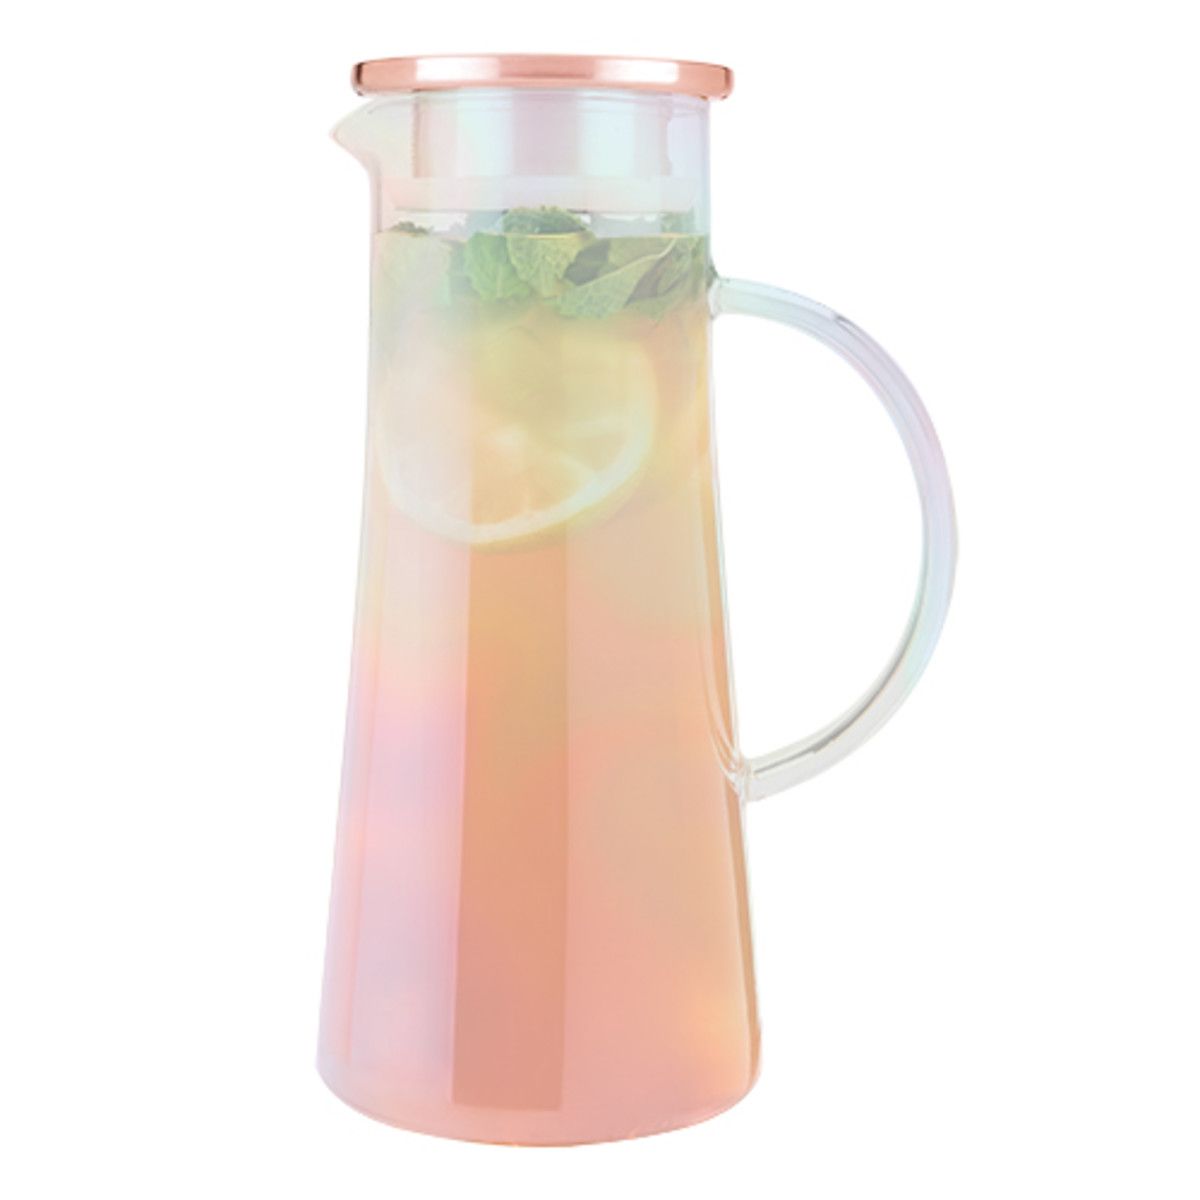 Pinky Up Charlie Iridescent Glass Iced Tea Carafe, Loose Leaf Tea  Accessories, Iced Tea Beverage Brewer, 1.5 liter Capacity